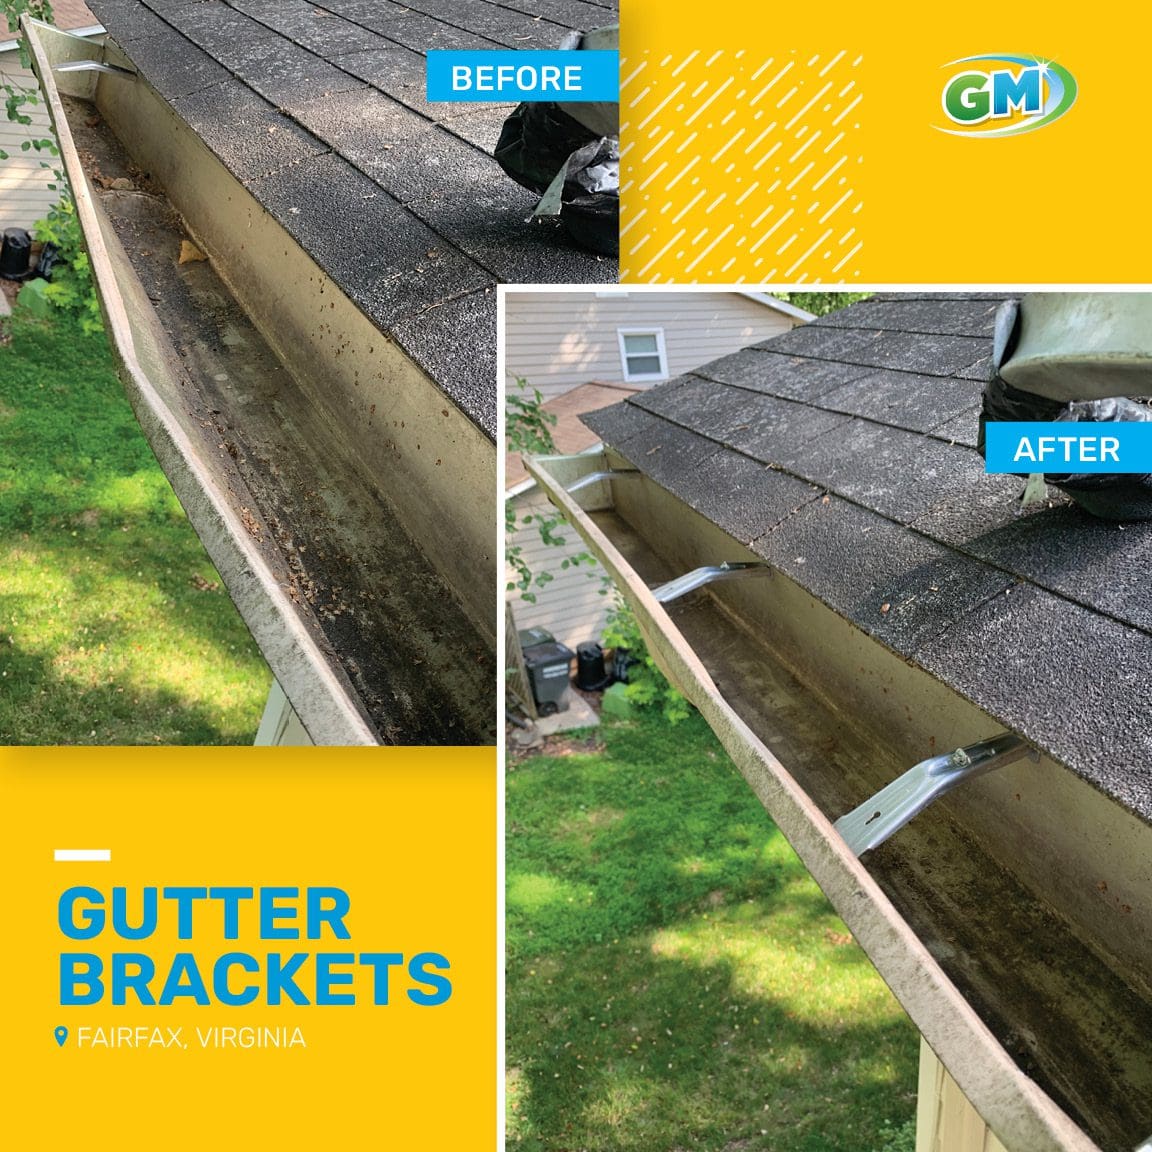 Gutter brackets installation by GutterMaid before and after pictures